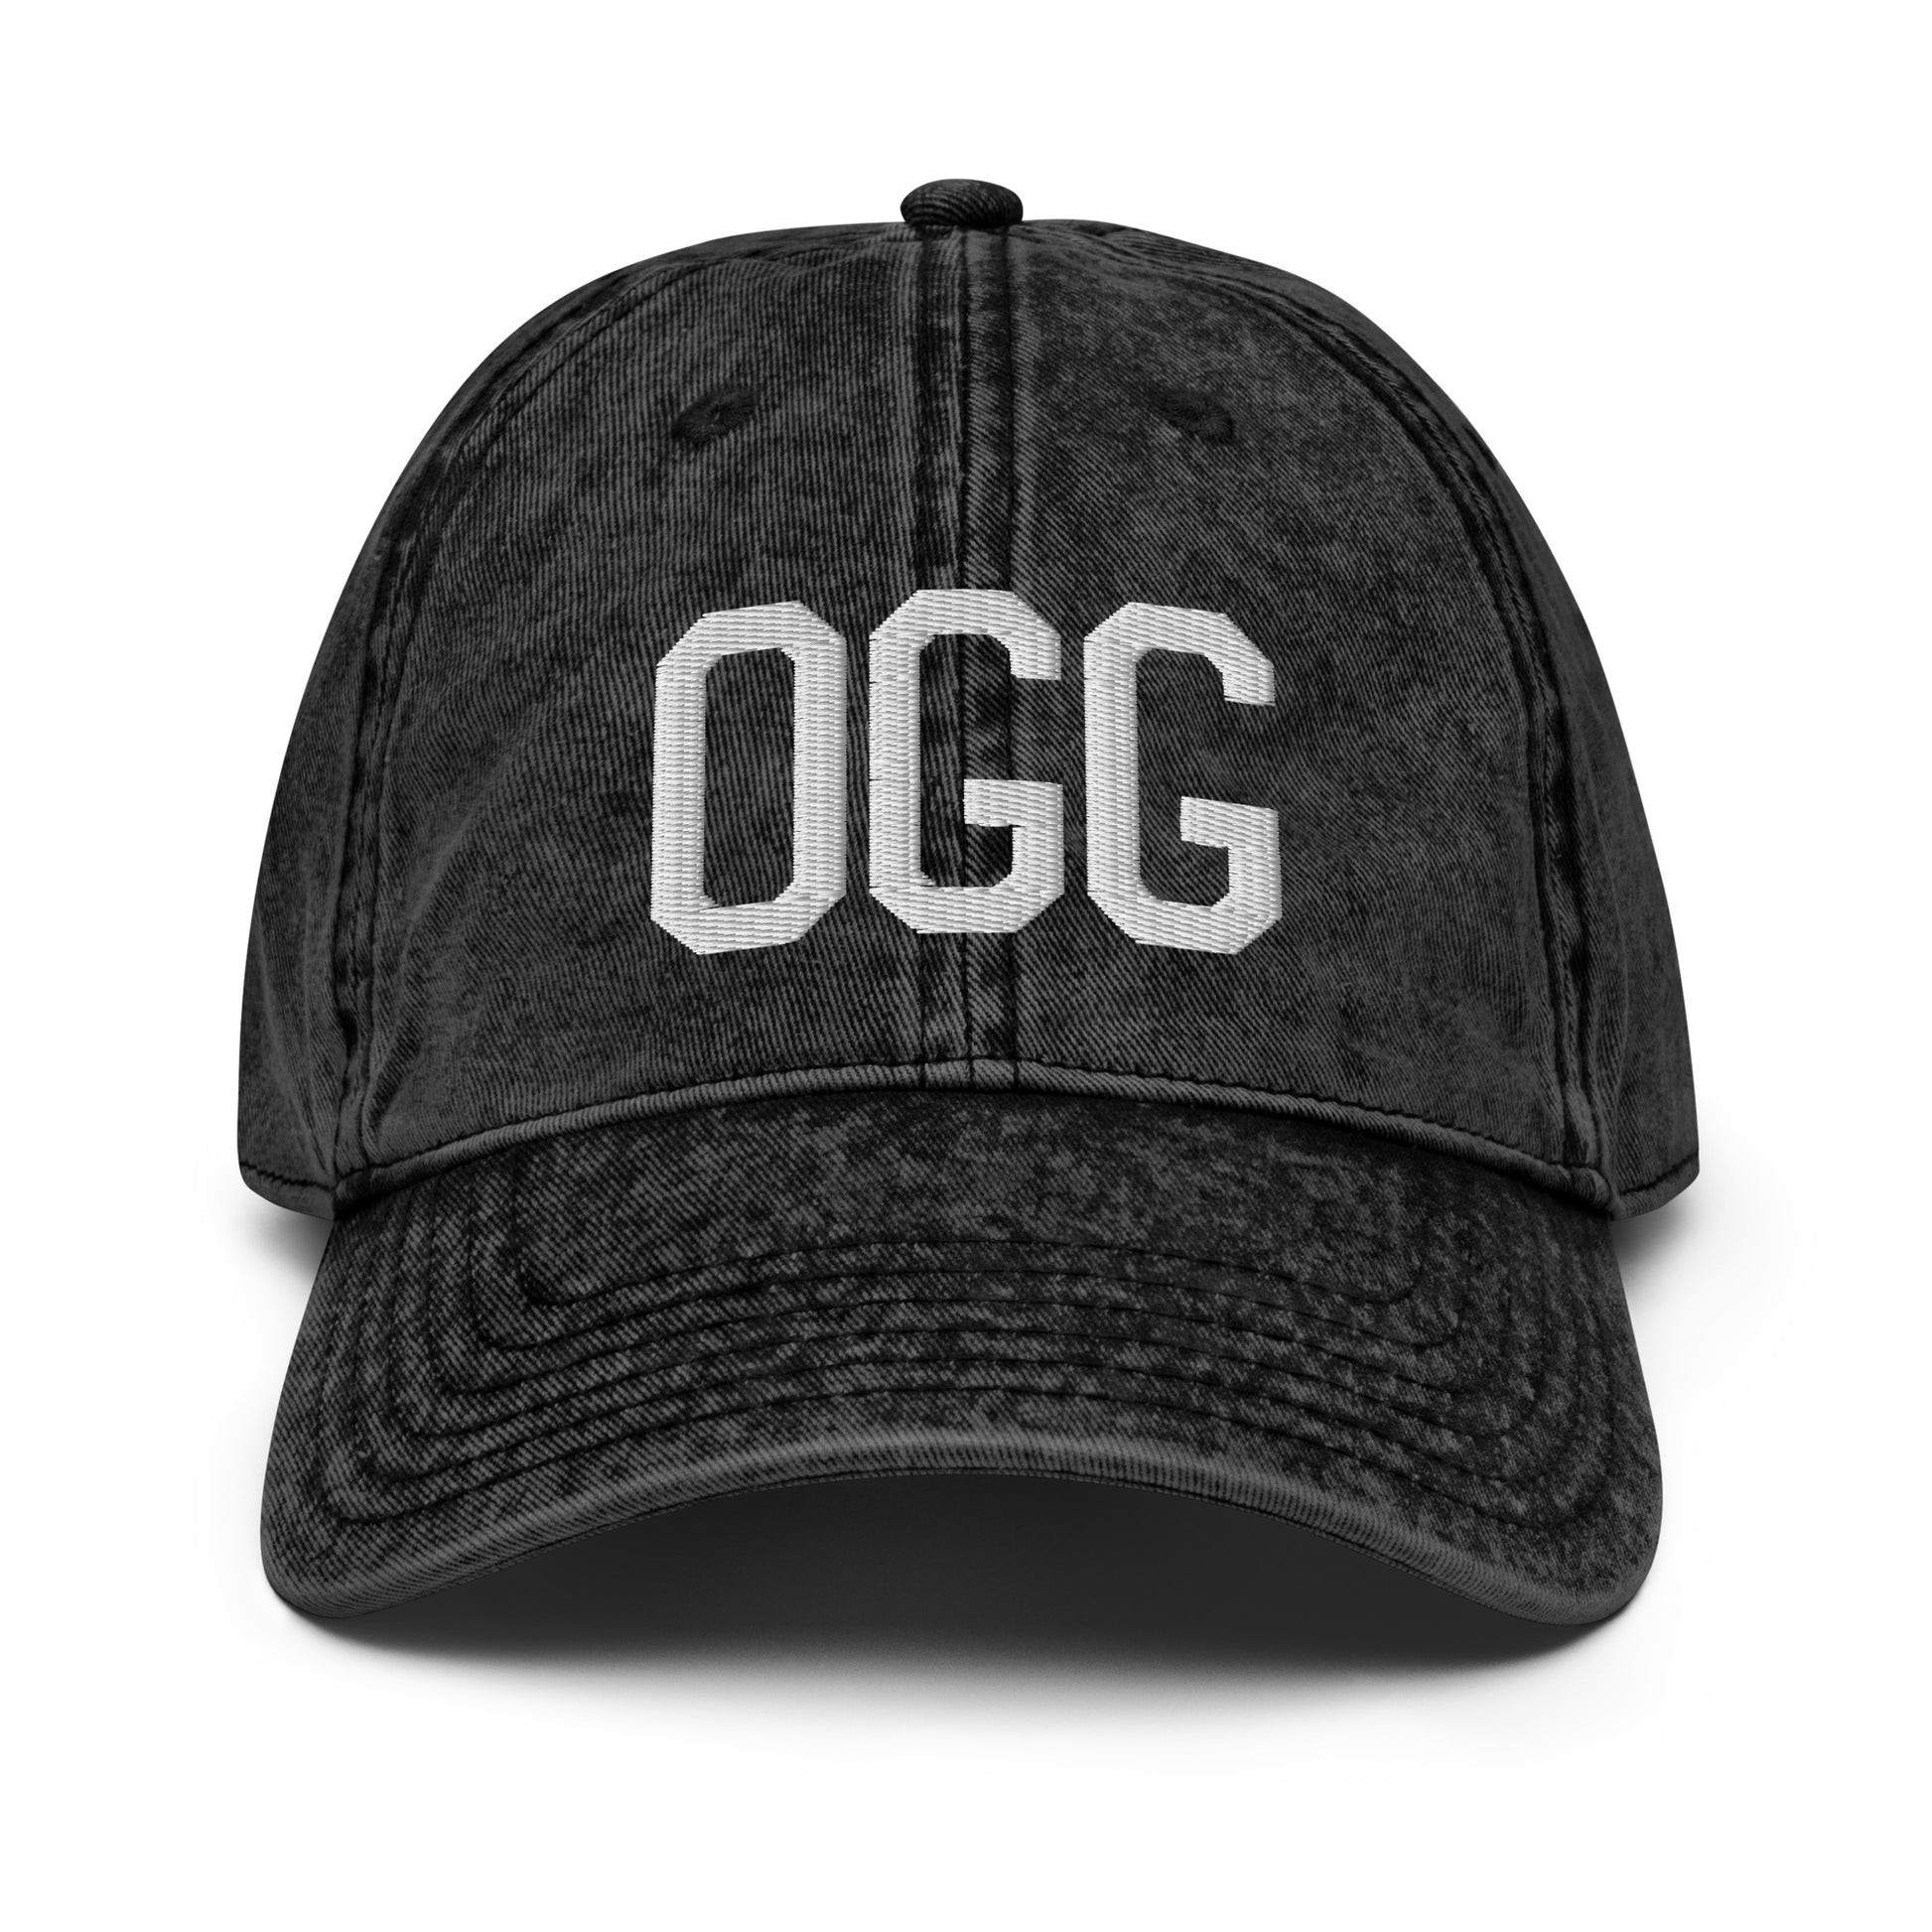 Airport Code Twill Cap - White • OGG Maui • YHM Designs - Image 14